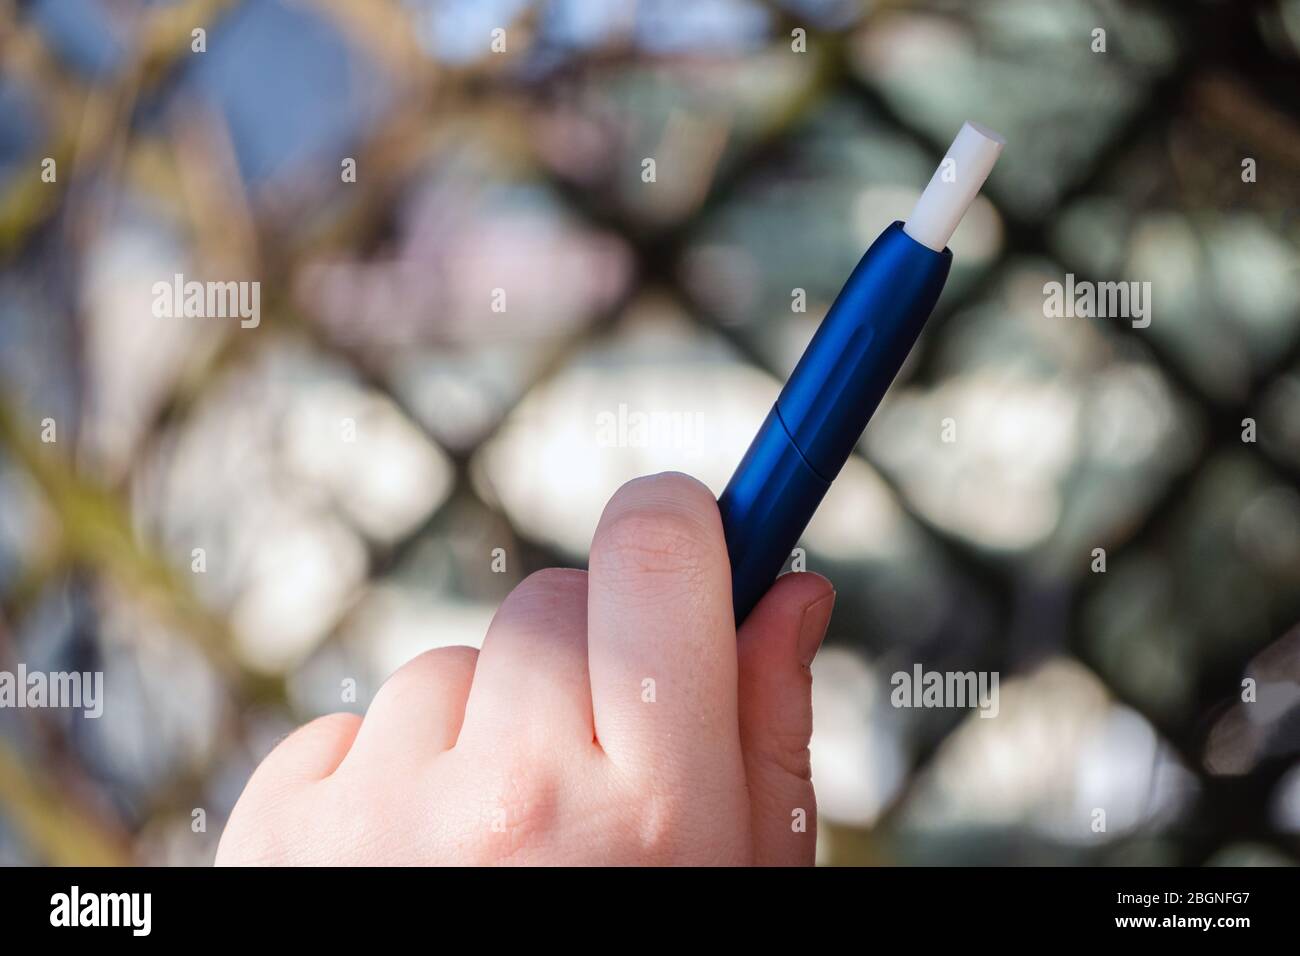 Woman holding e-cigarette. Close up of smoking electronic cigarette. Alternative nicotine heating product Stock Photo